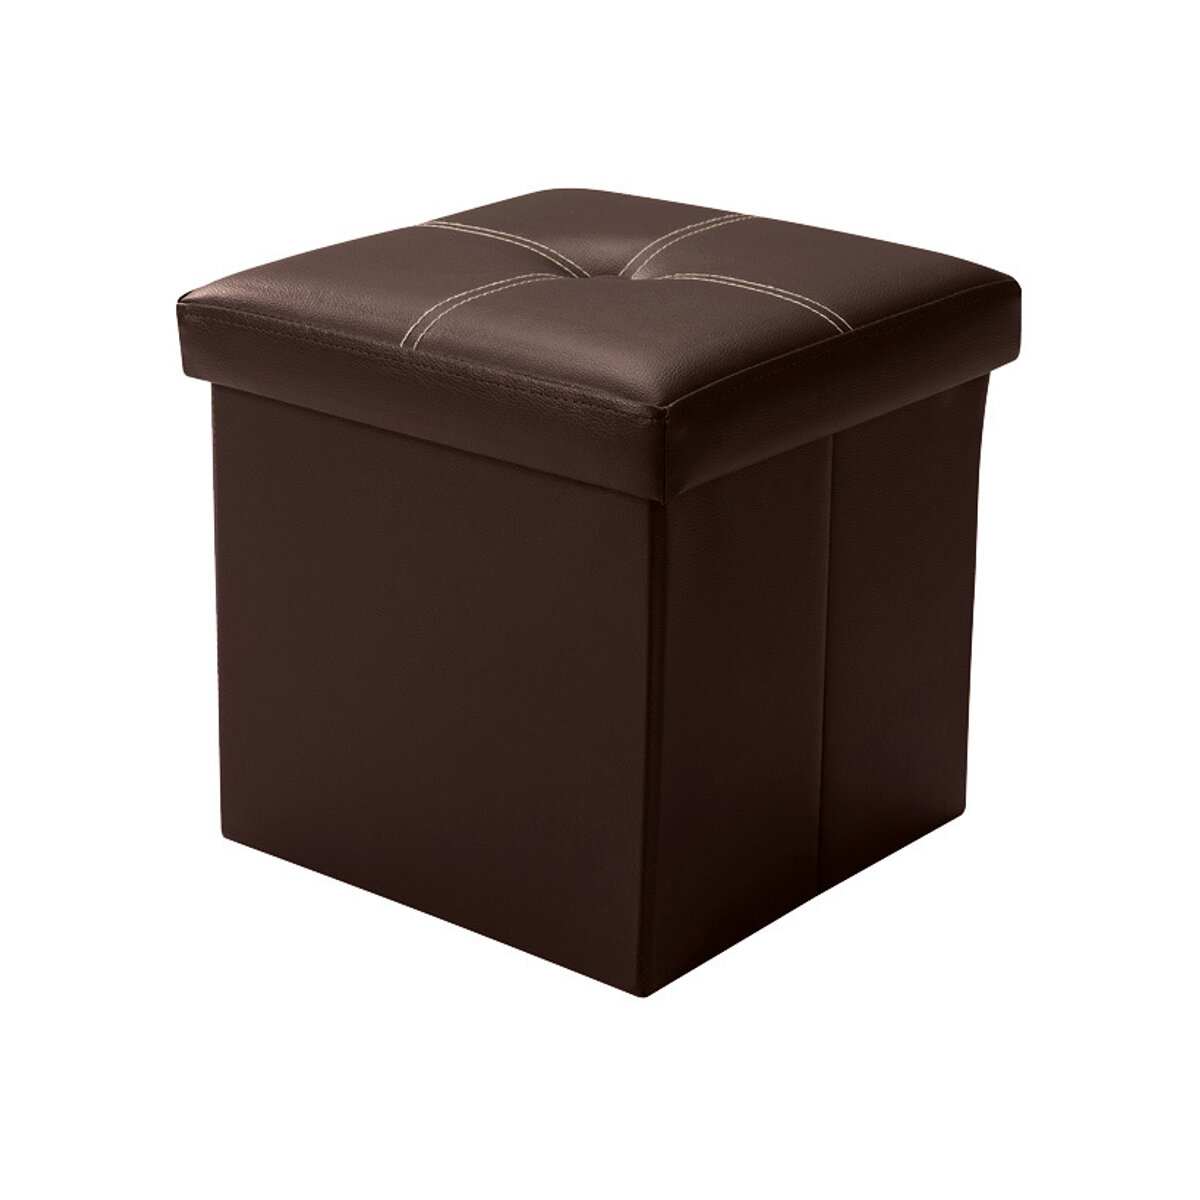 

Multifunctional Storage Stool PU Leather Sofa Ottoman Bench Footrest Box Seat Footstool Square Chair Home Office Furnitu